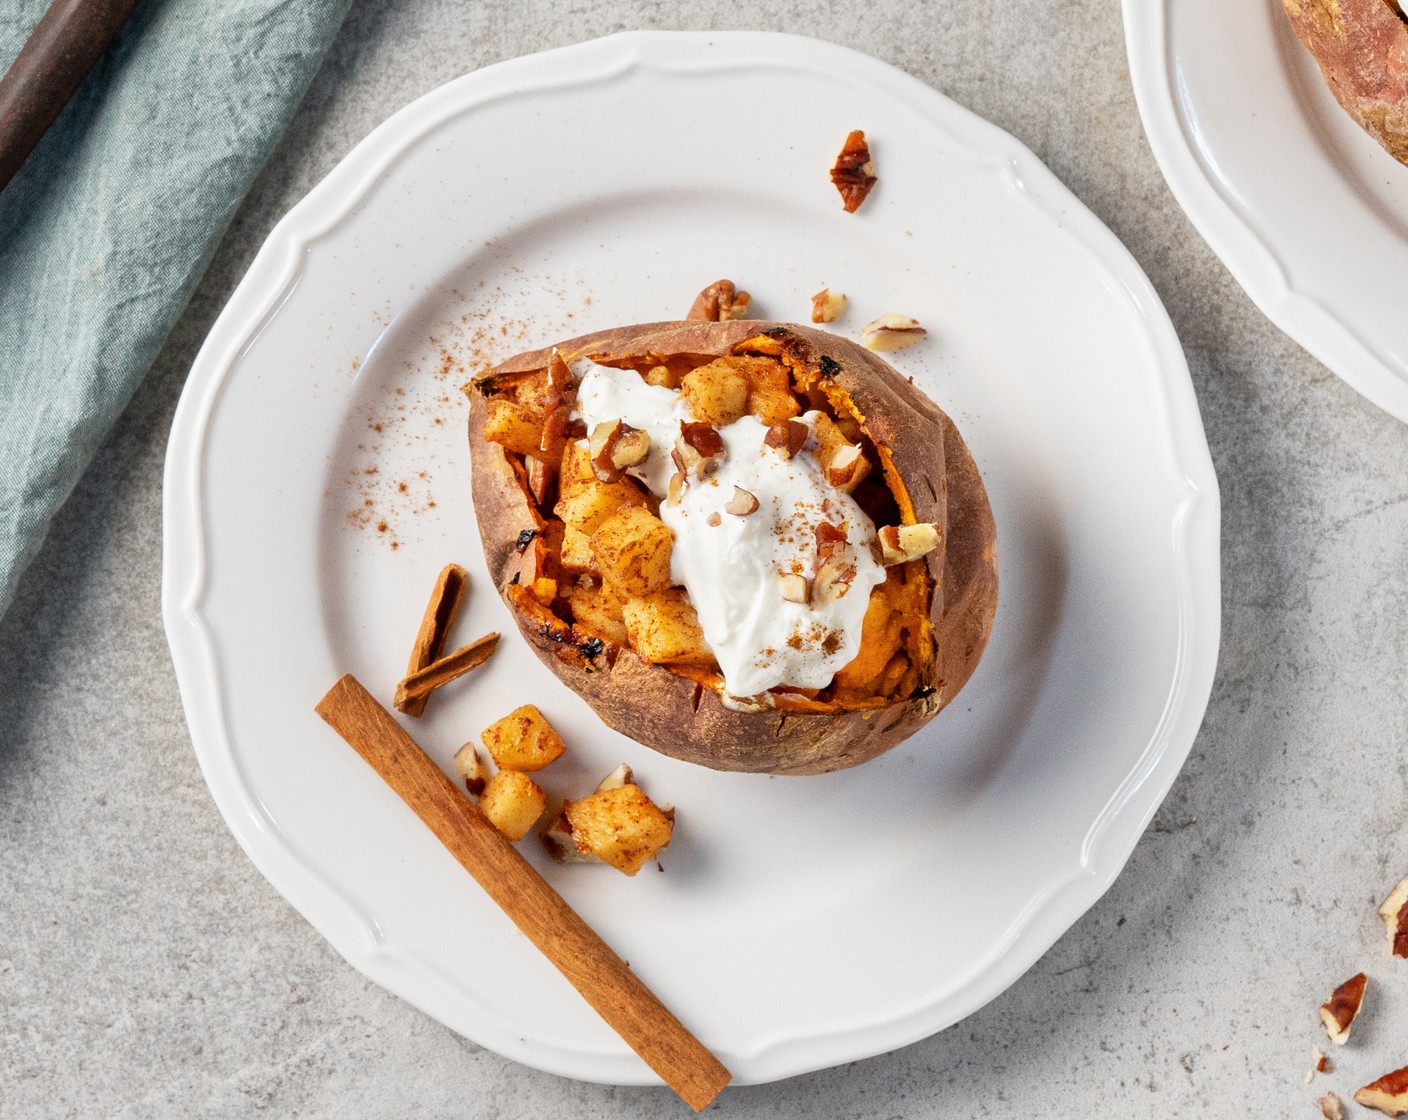 step 6 Top with cinnamon apple topping, Unsweetened Coconut Yogurt (1/4 cup), and Pecans (1/2 cup) and serve.